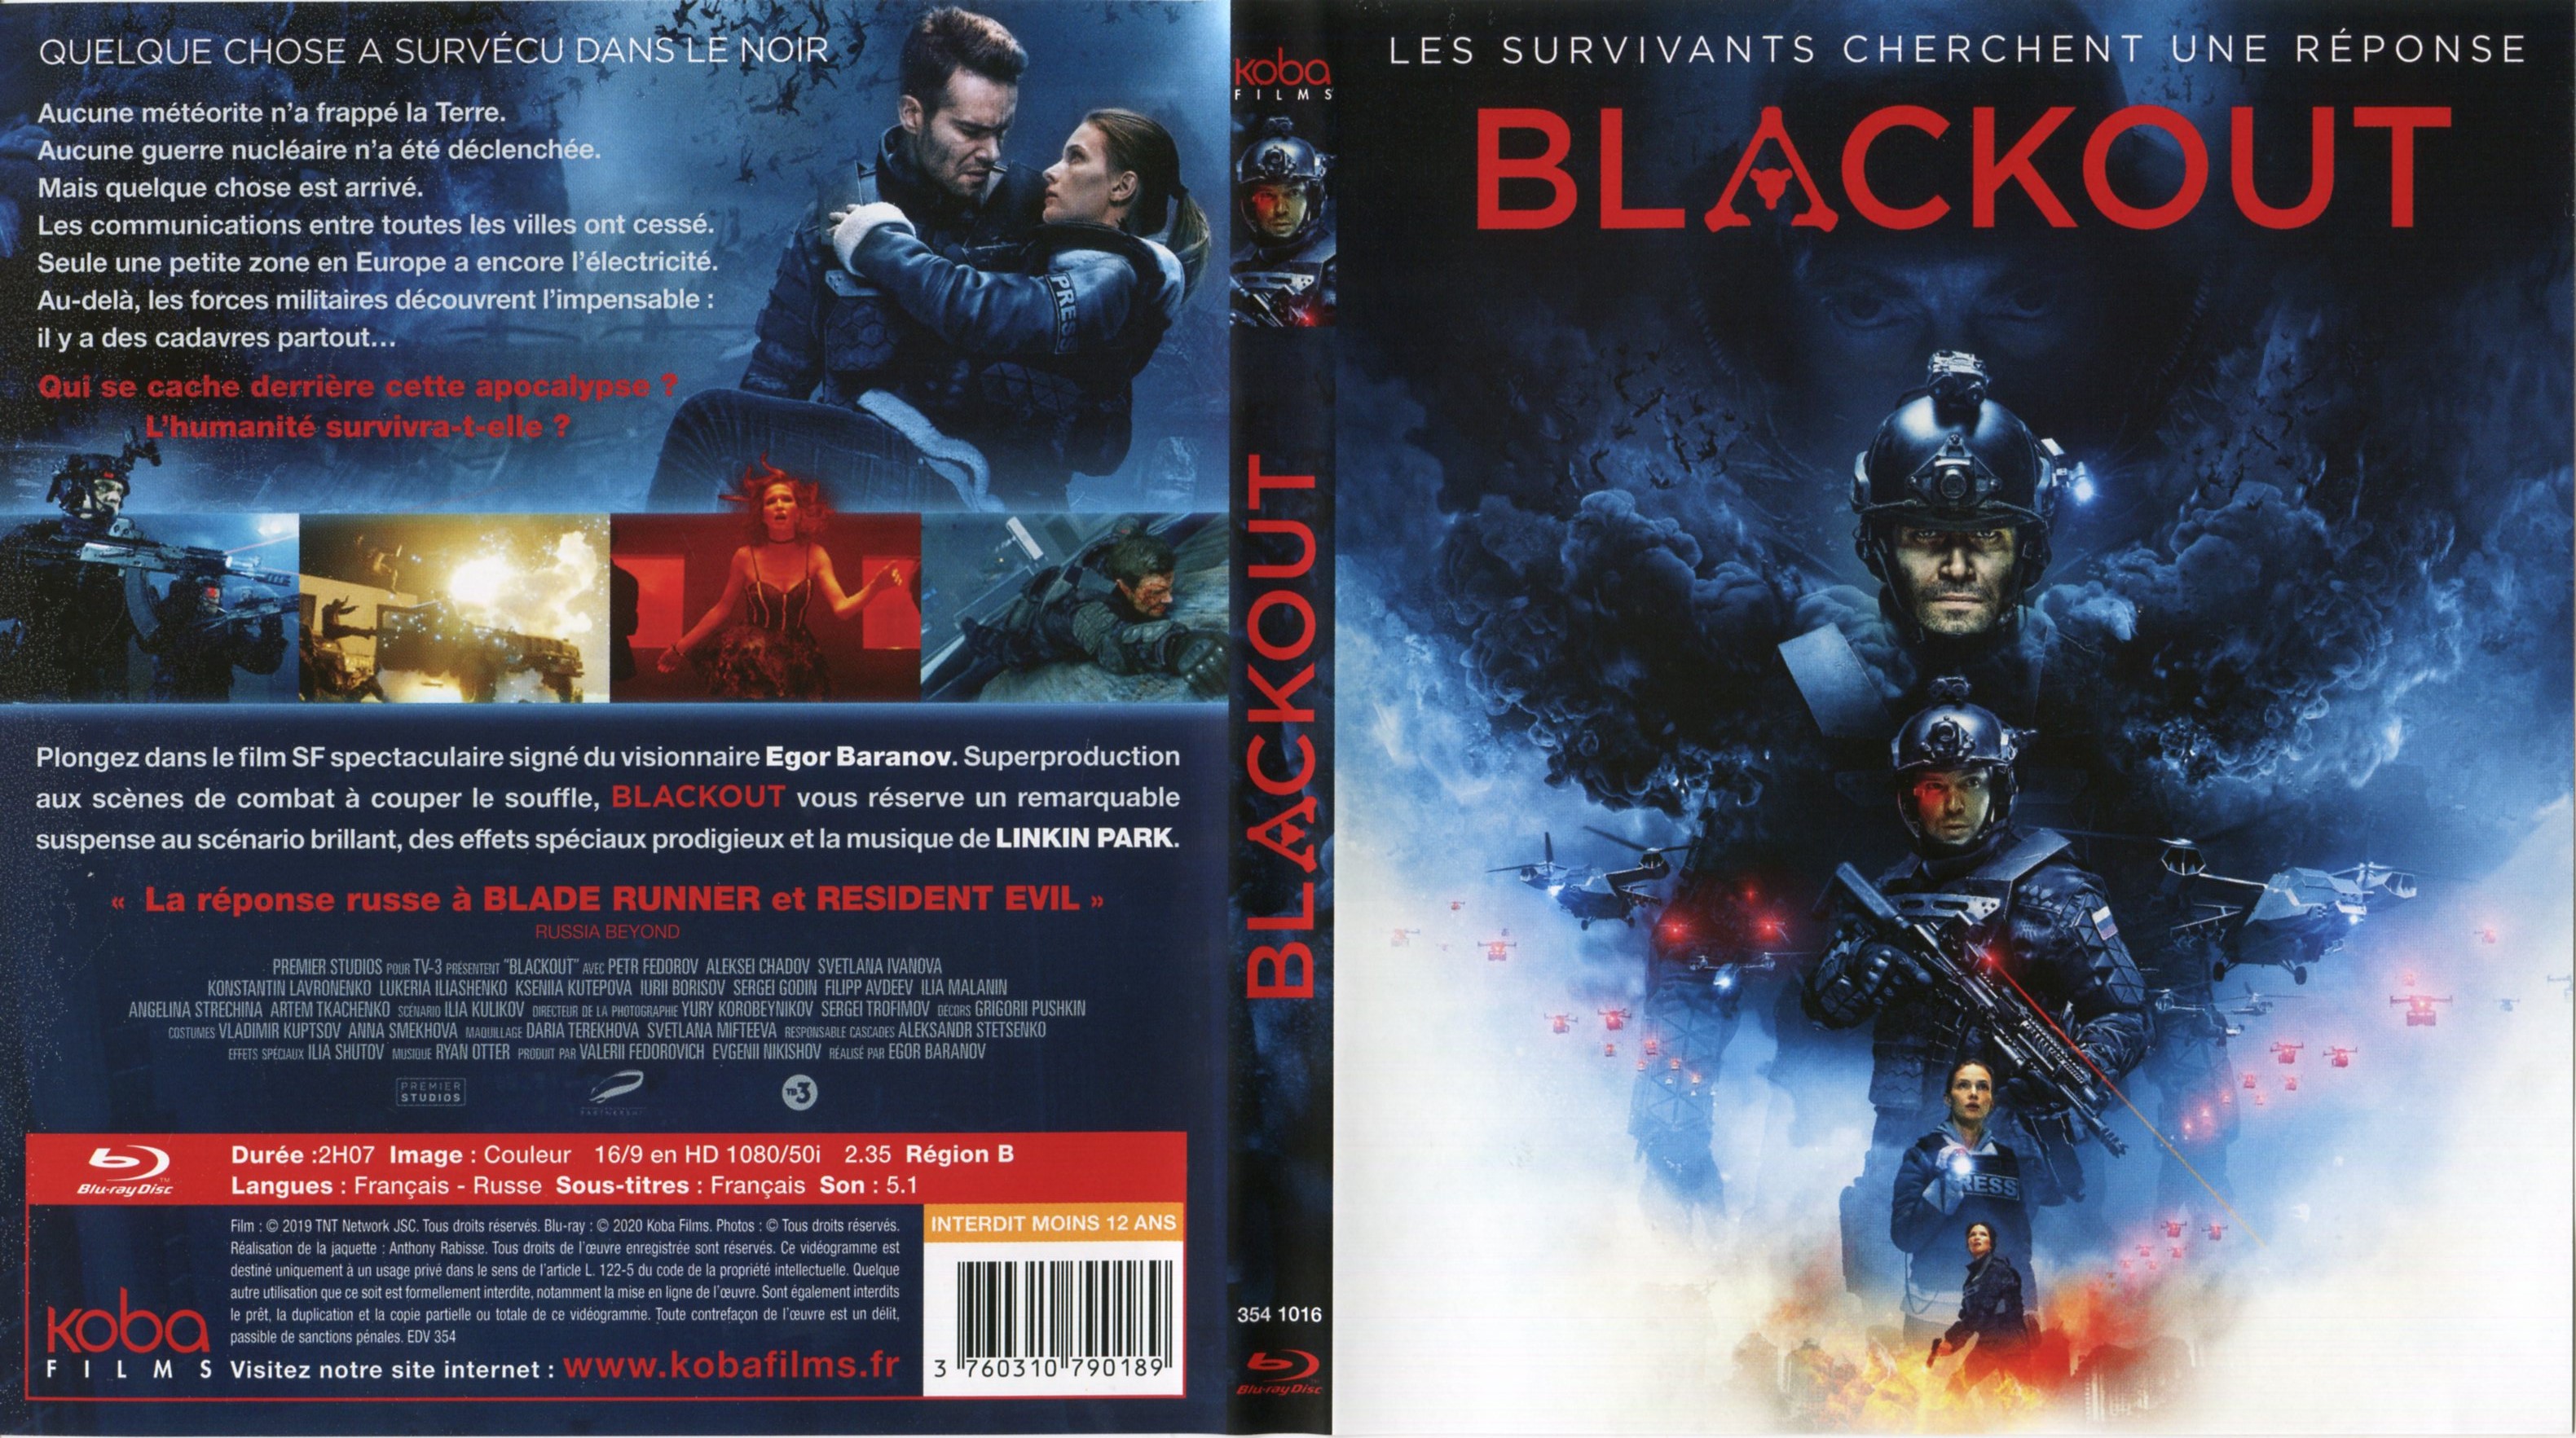 Jaquette DVD Blackout 2019 (BLU-RAY)